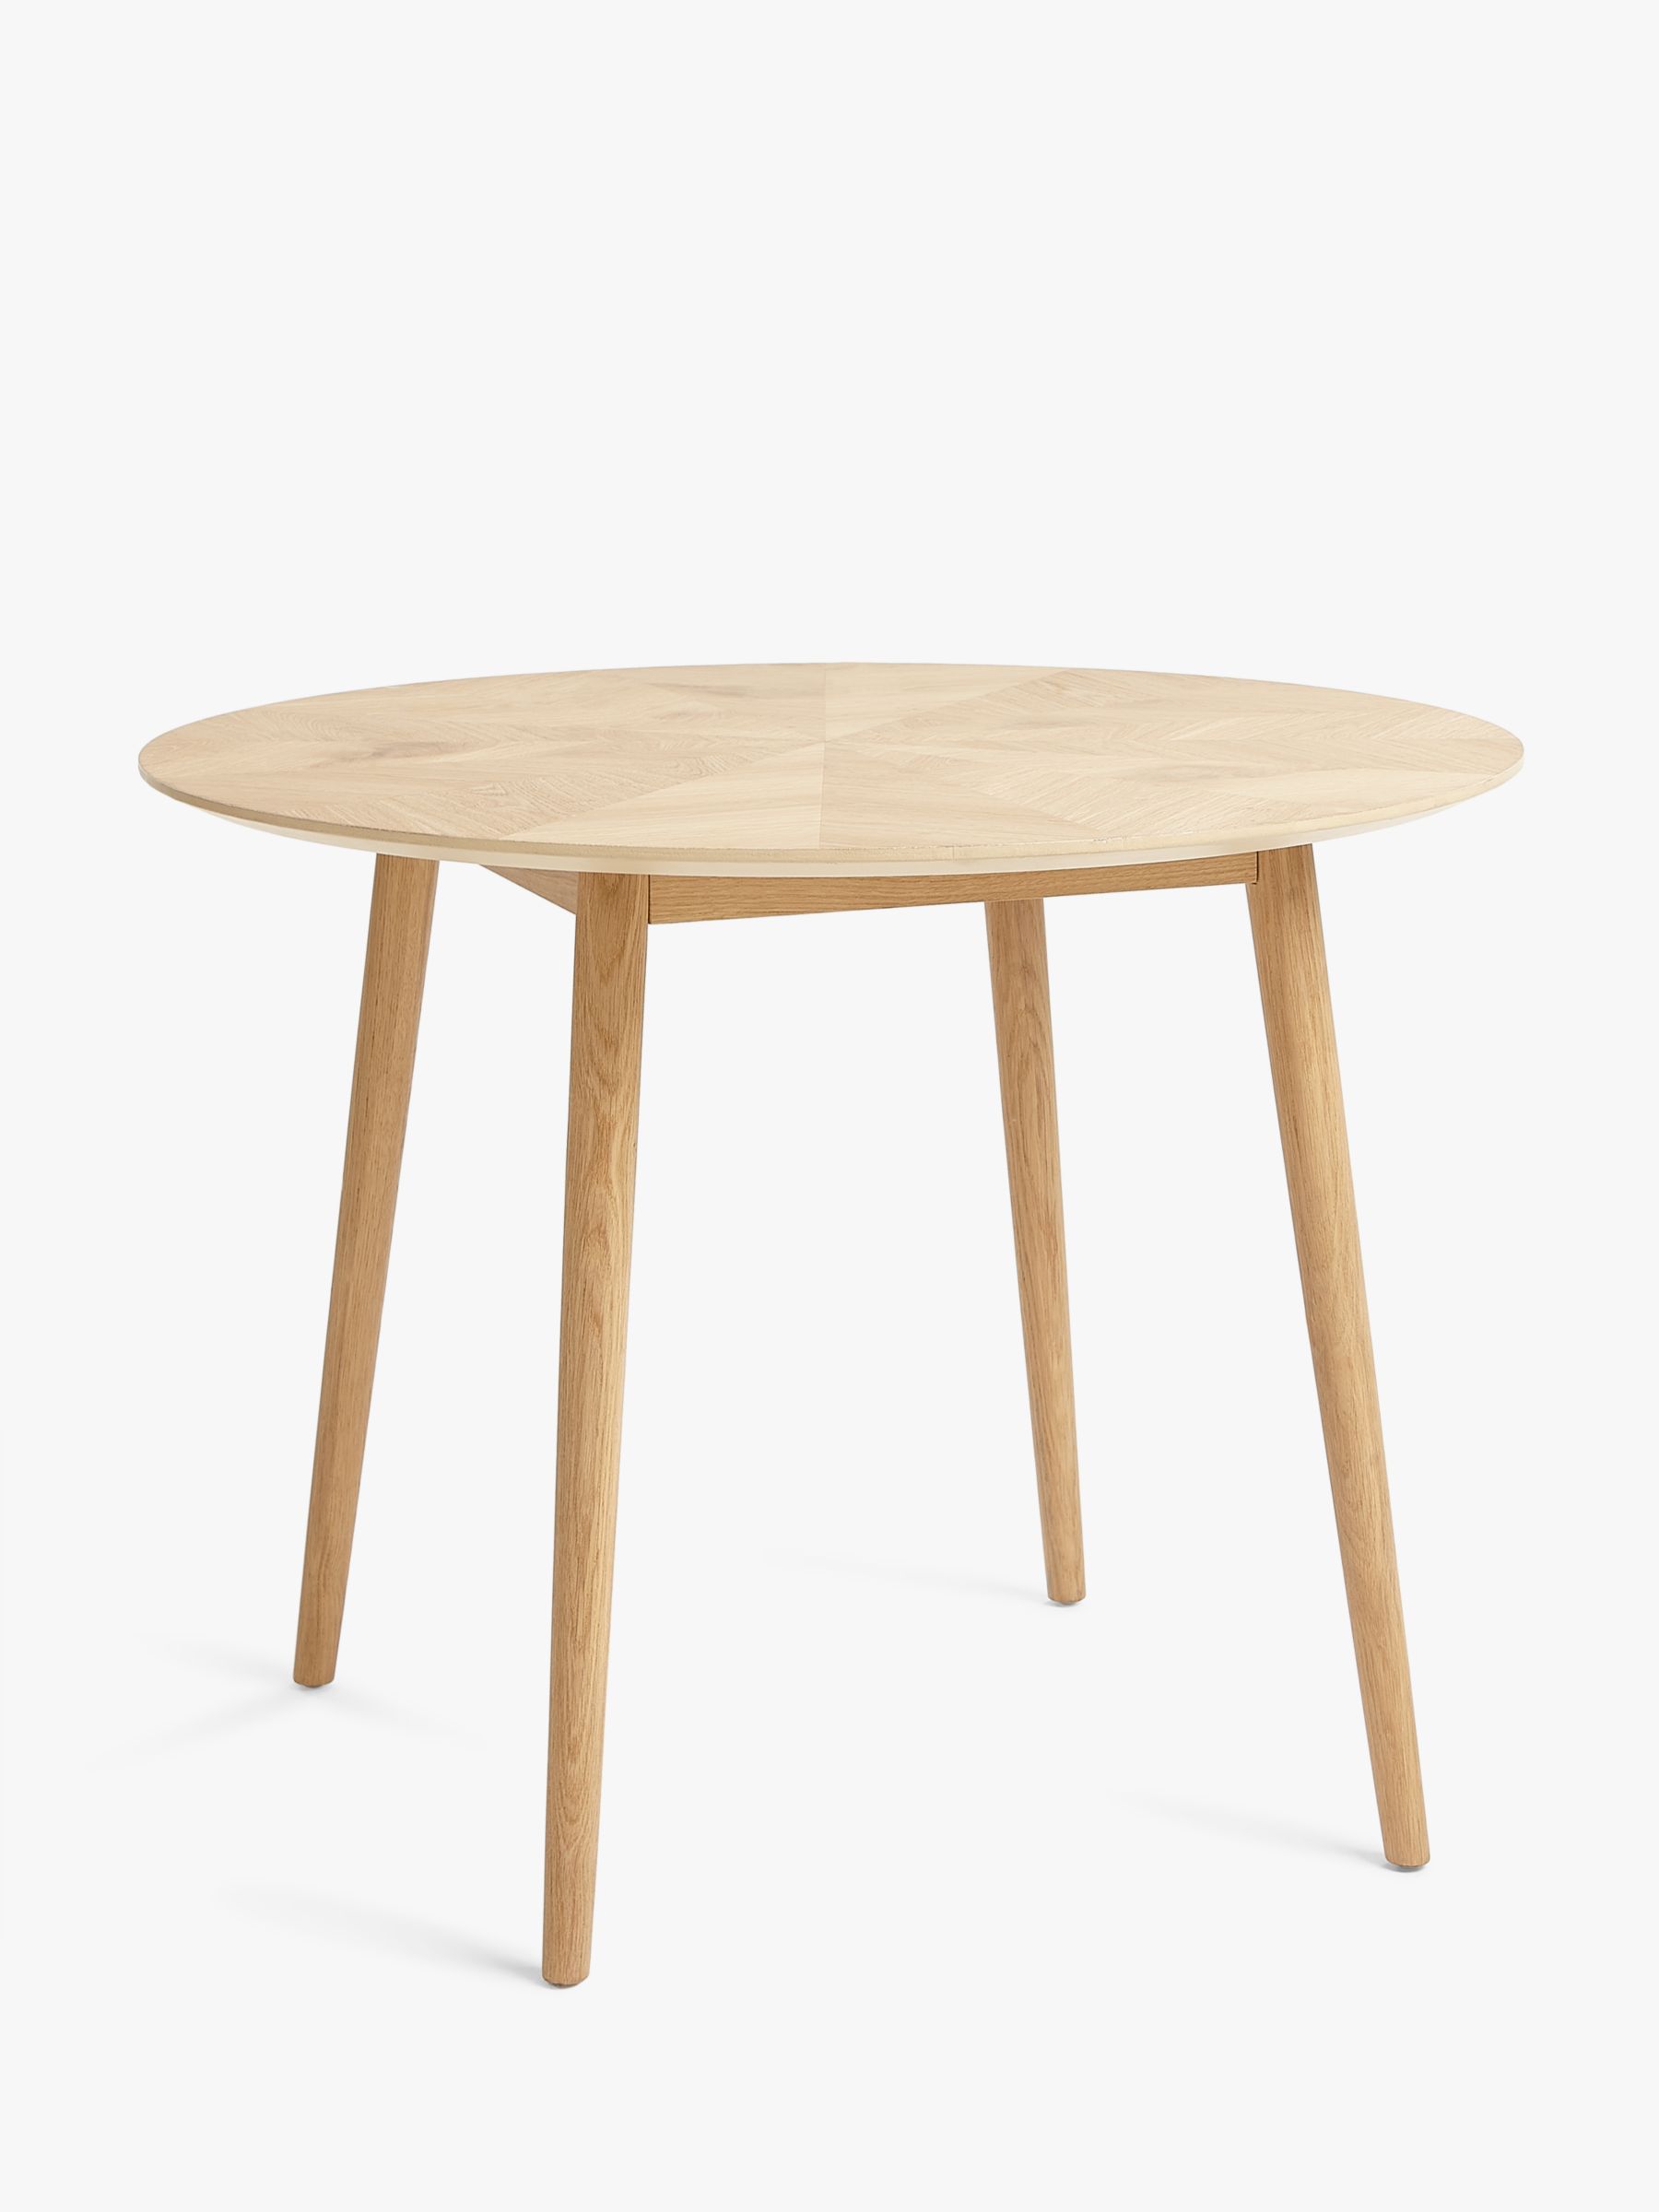 Photo of John lewis iona 4 seater round dining table